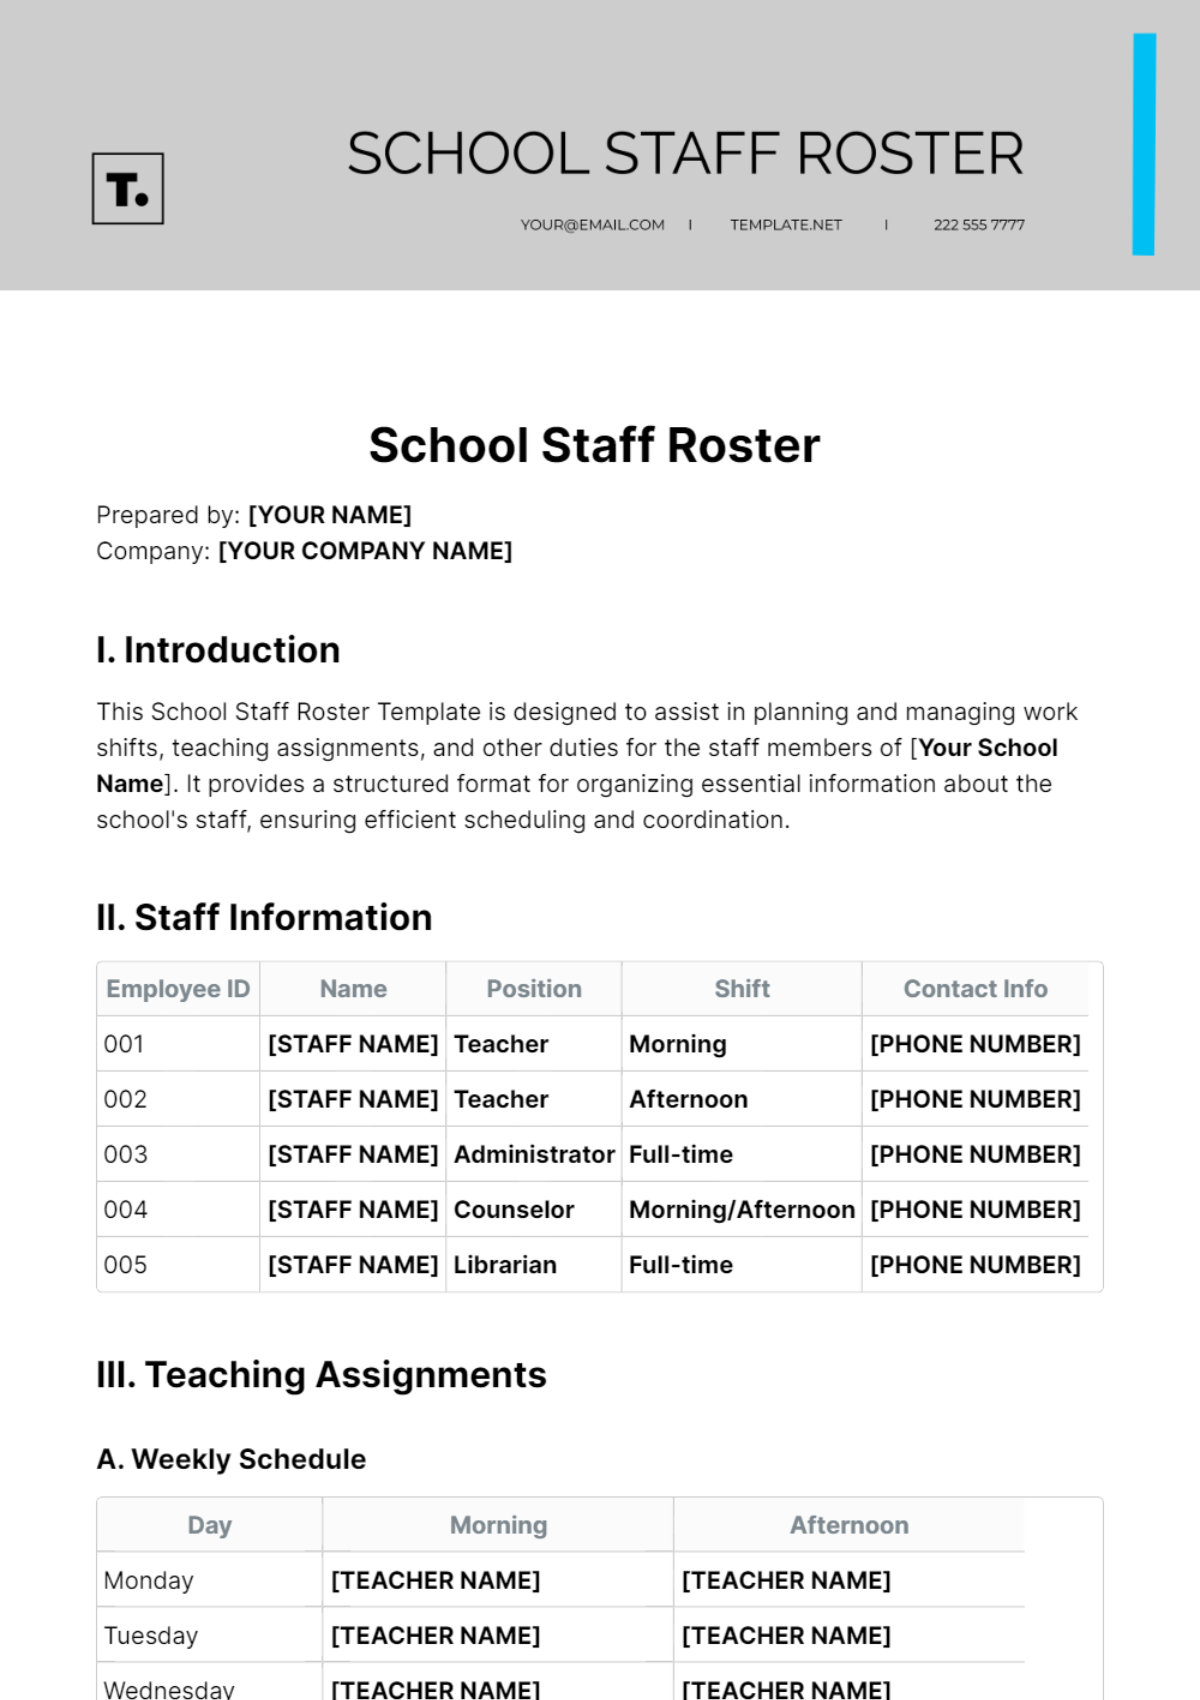 School Staff Roster Template